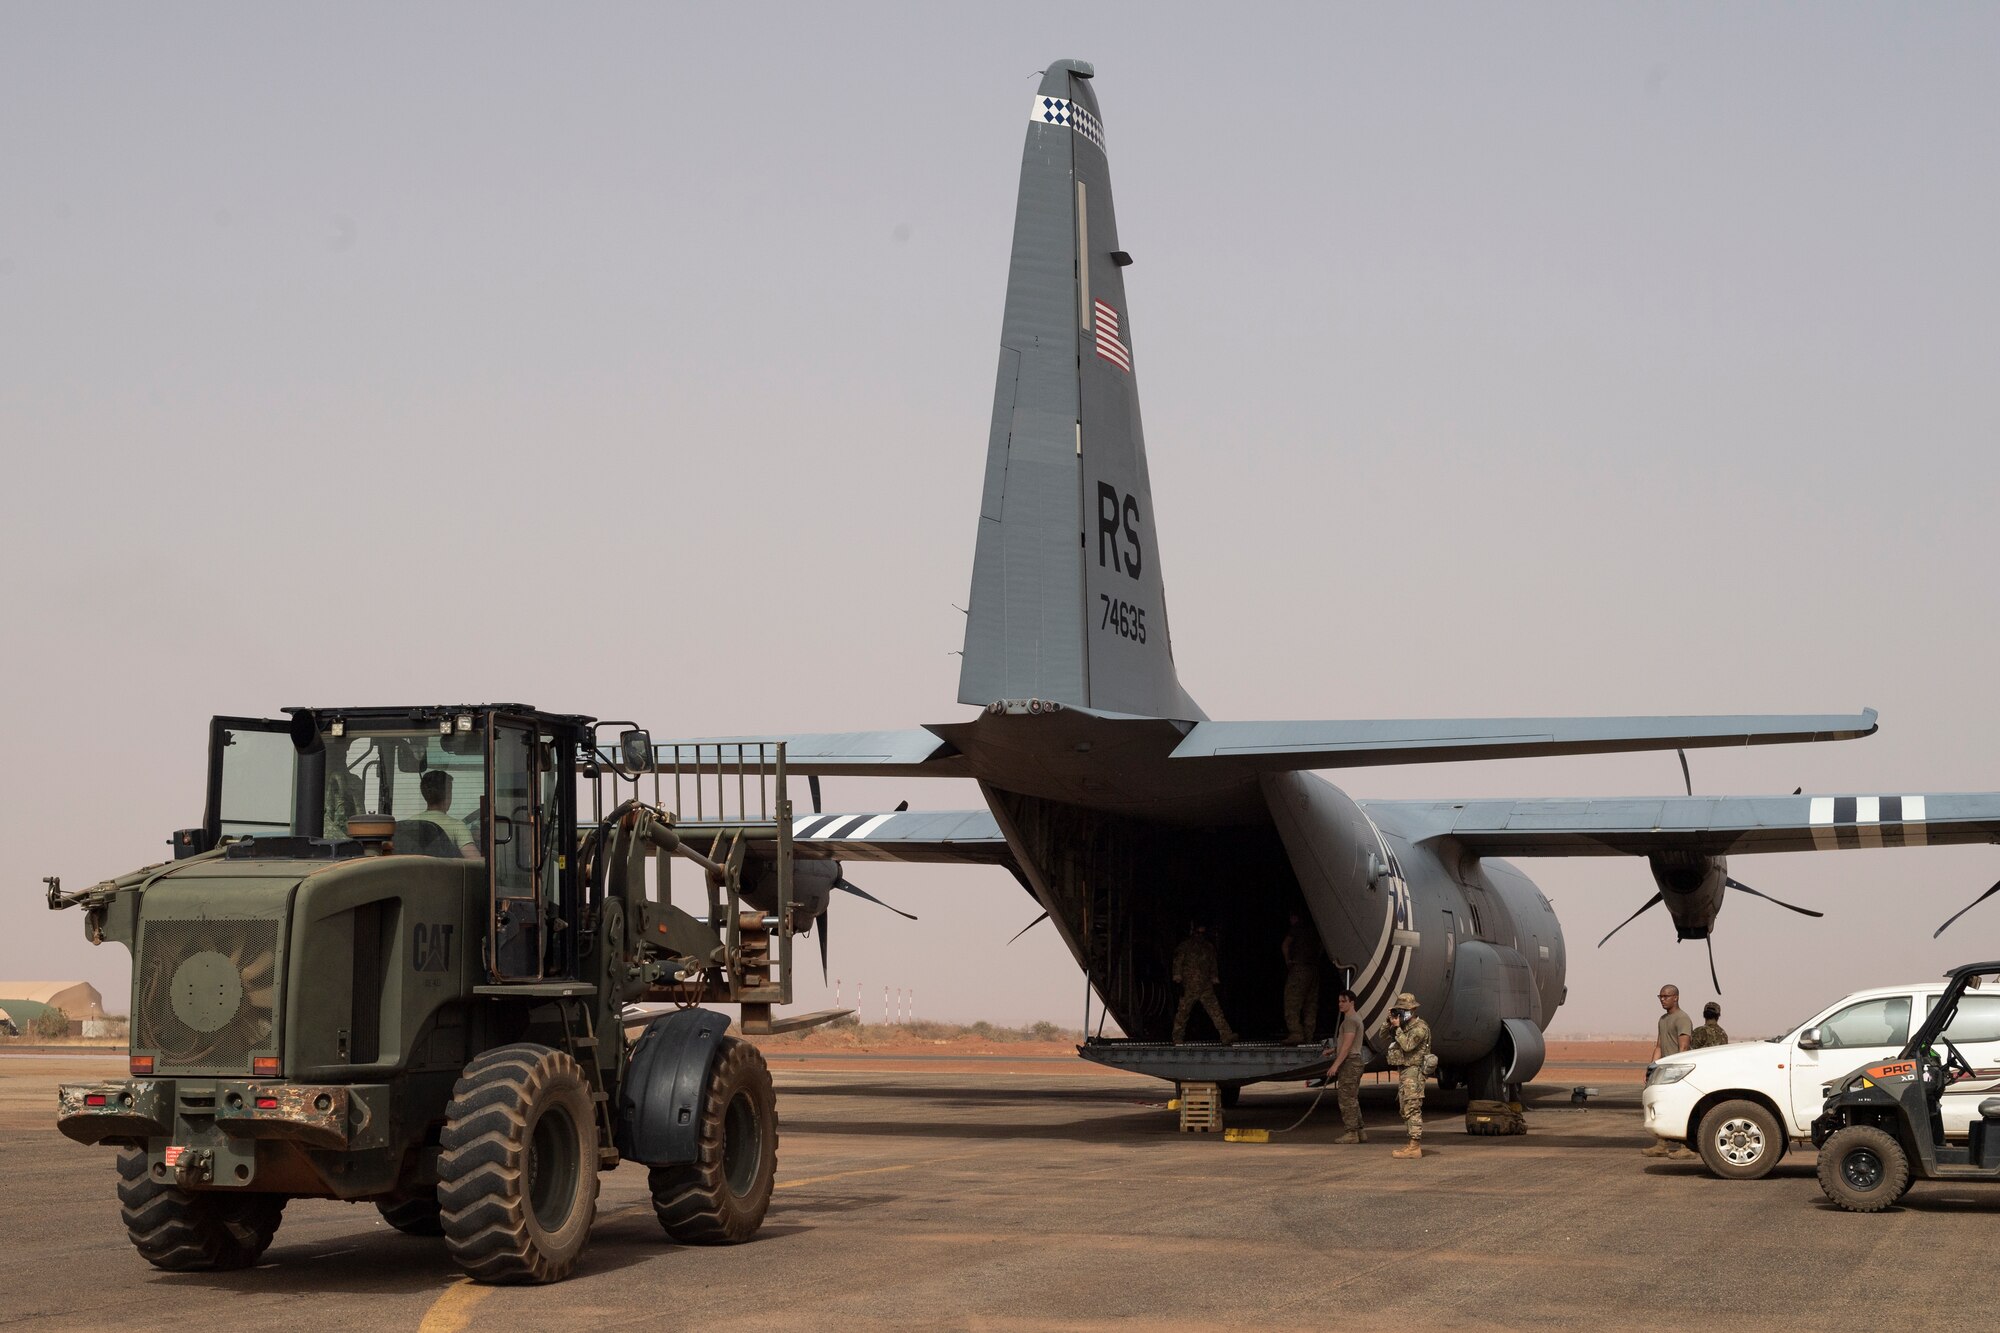 Airman driving a forklift unloads cargo from a C-130.